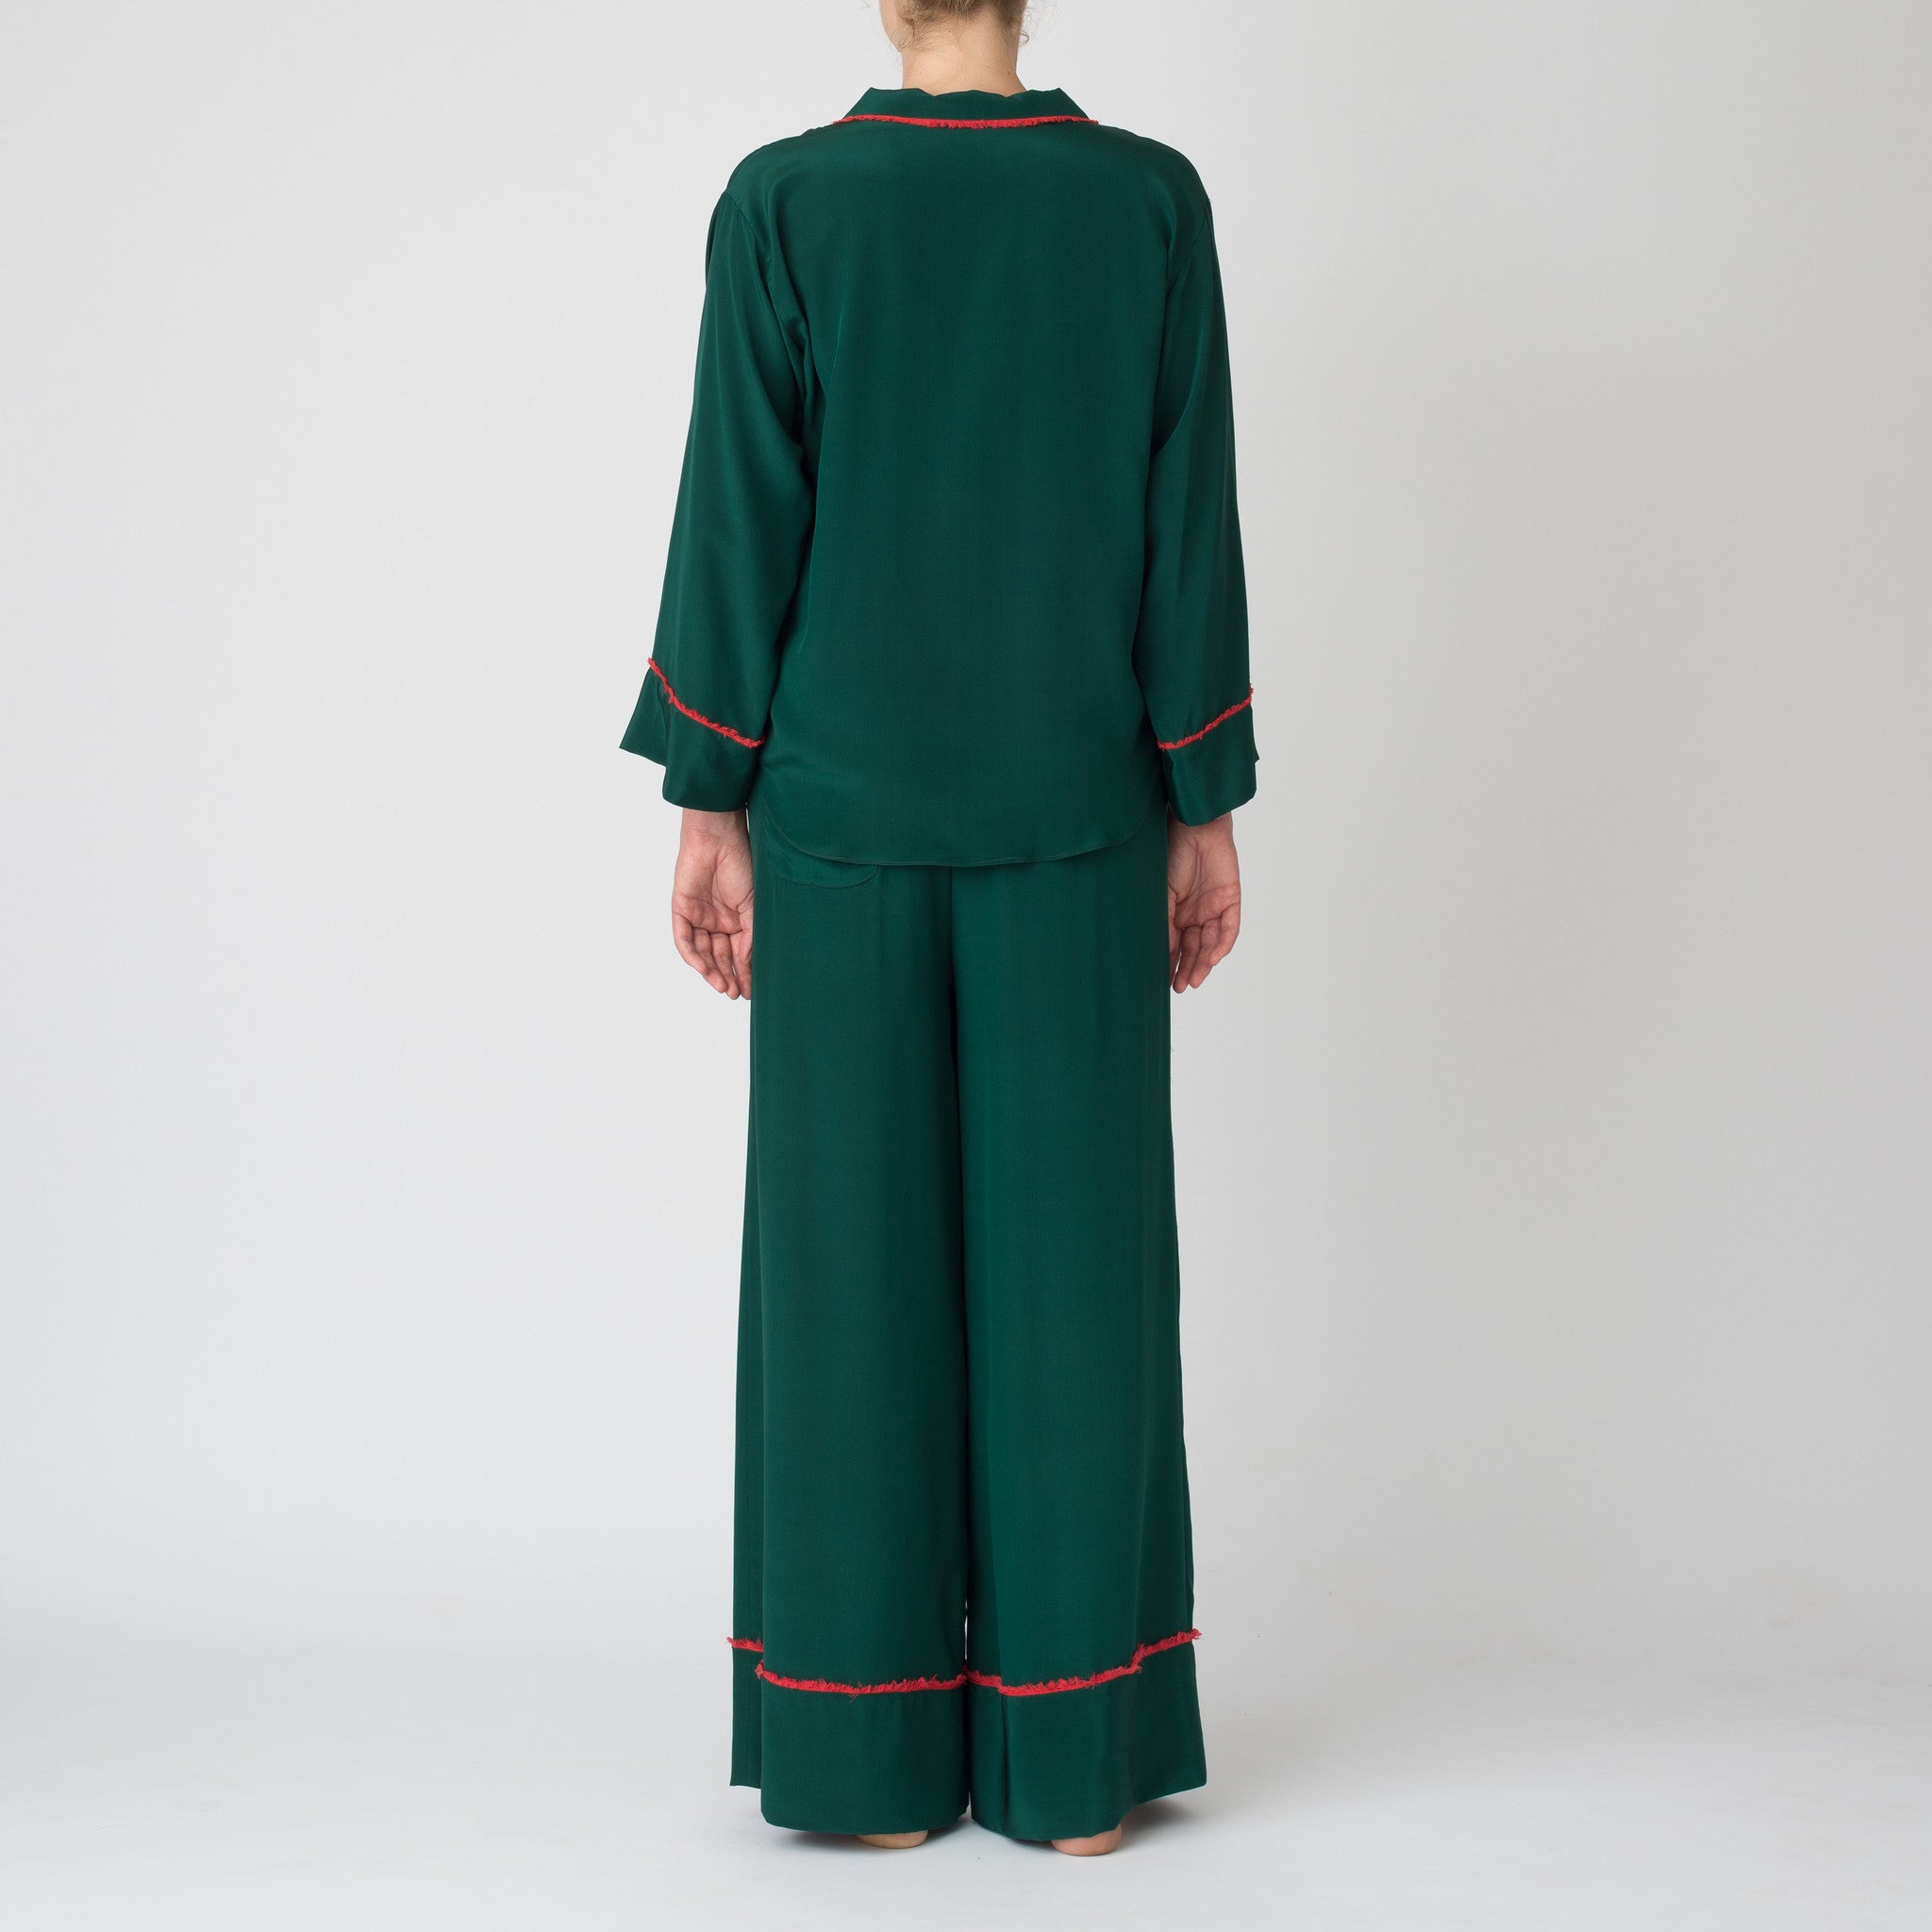 Matisse in Emerald with Coral Fringe